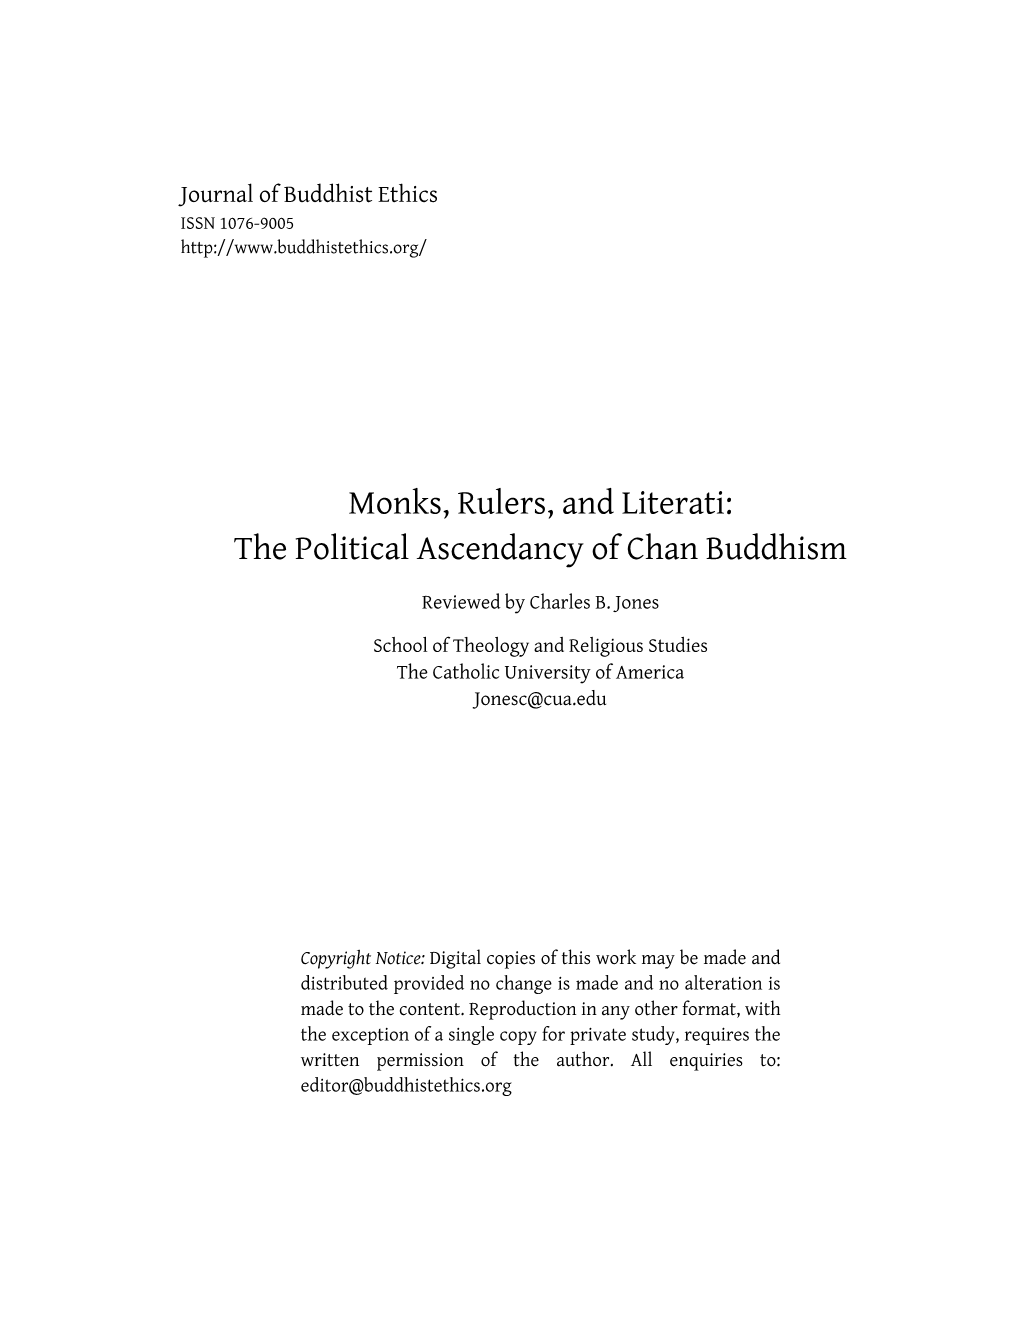 Review of Monks, Rulers and Literati: the Political Ascendancy of Chan